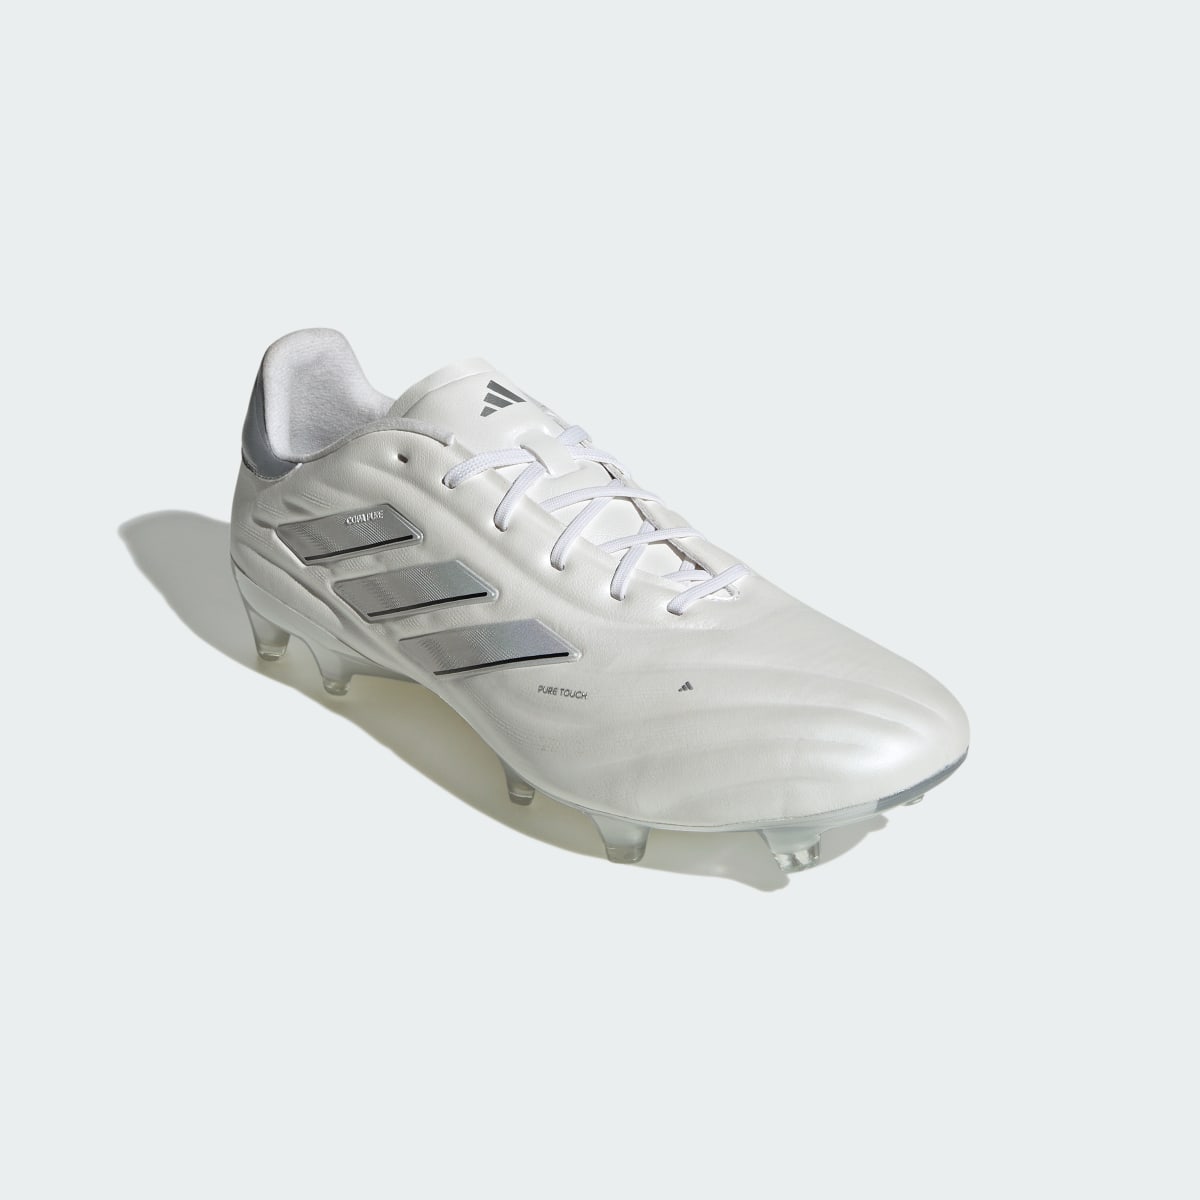 Adidas Copa Pure II Elite Firm Ground Boots. 5